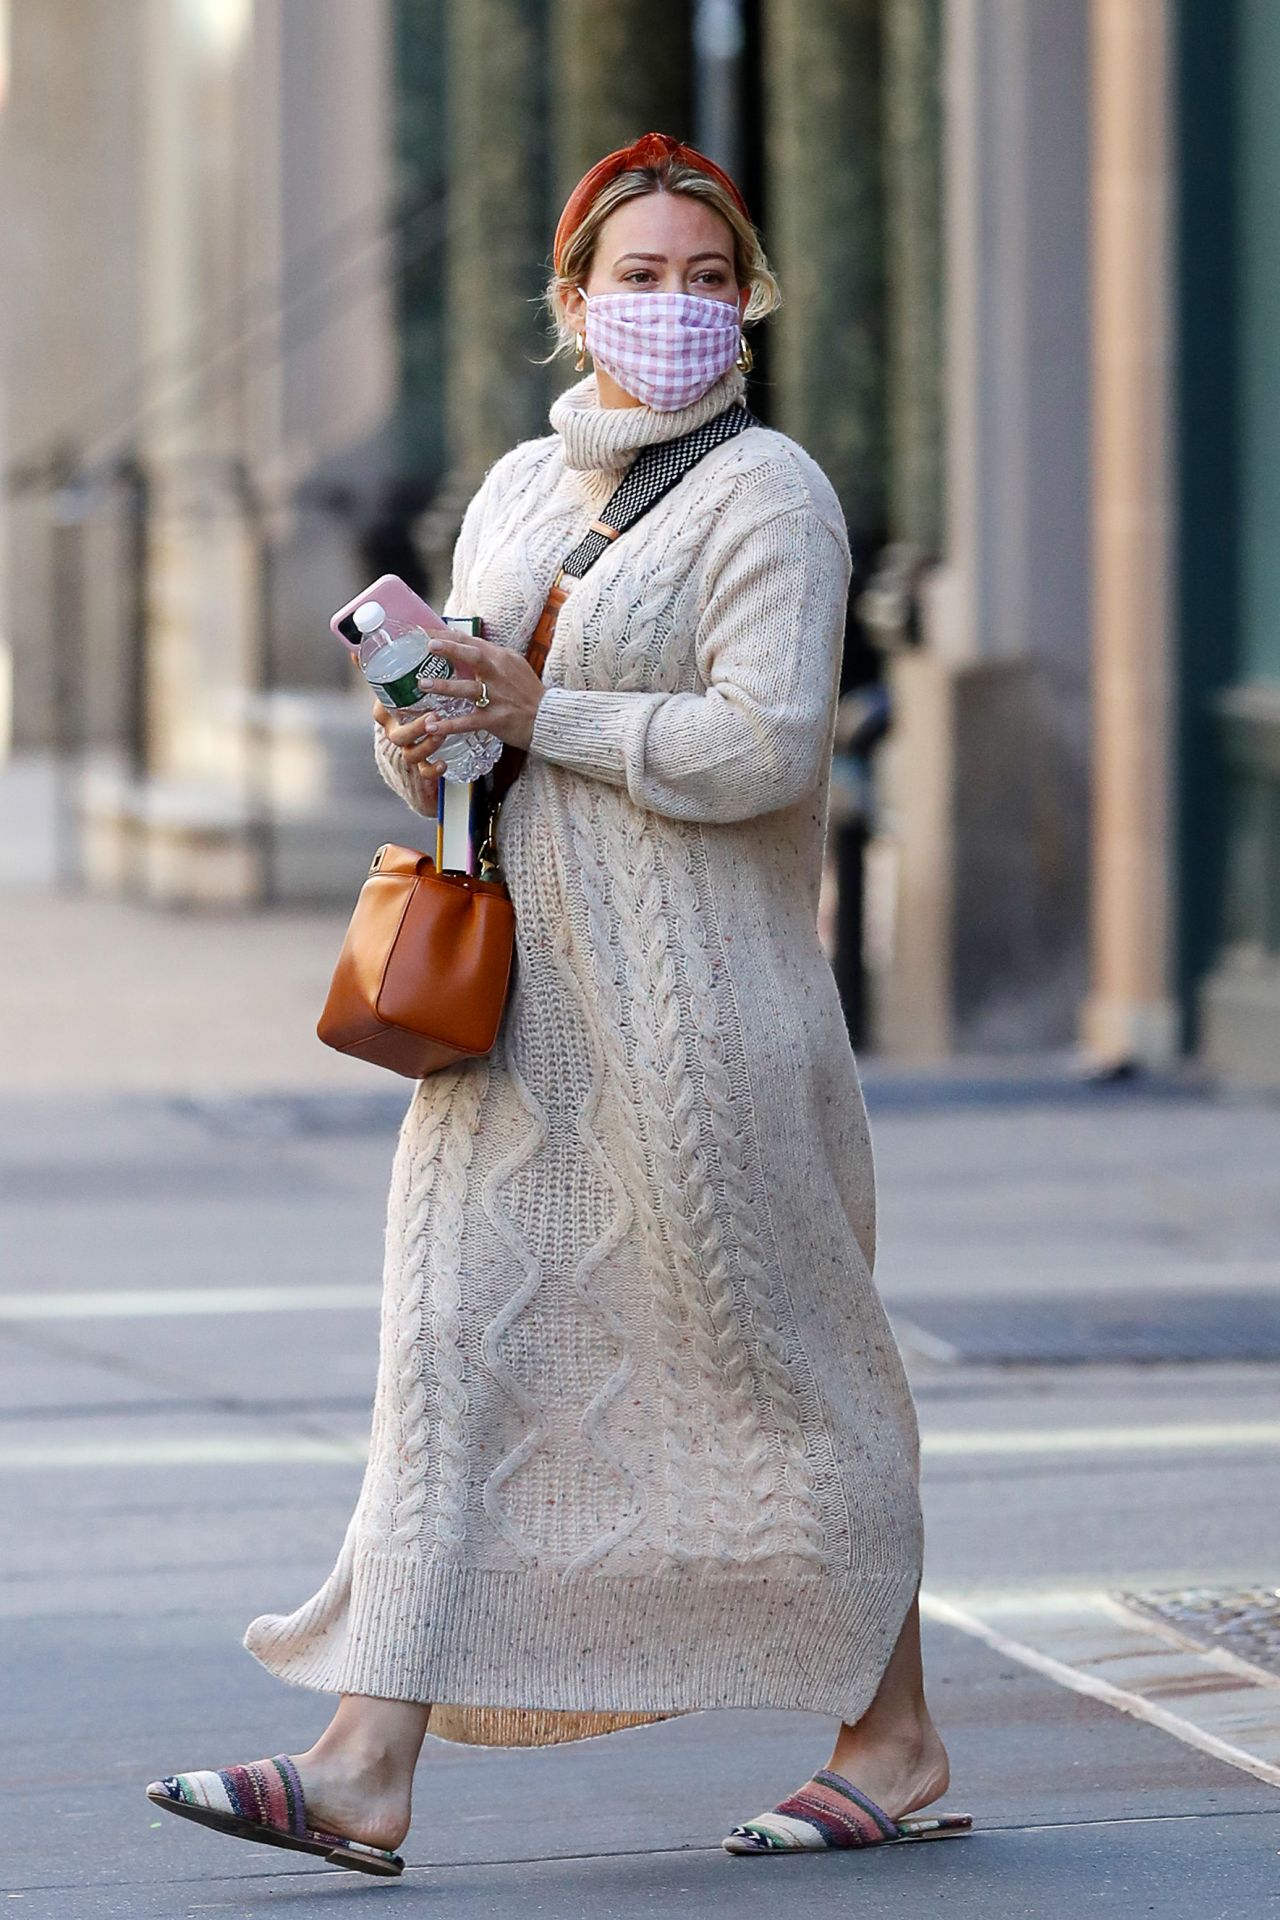 hilary-duff-in-a-cable-knit-sweater-dress-nyc-10-17-2020-6.jpg